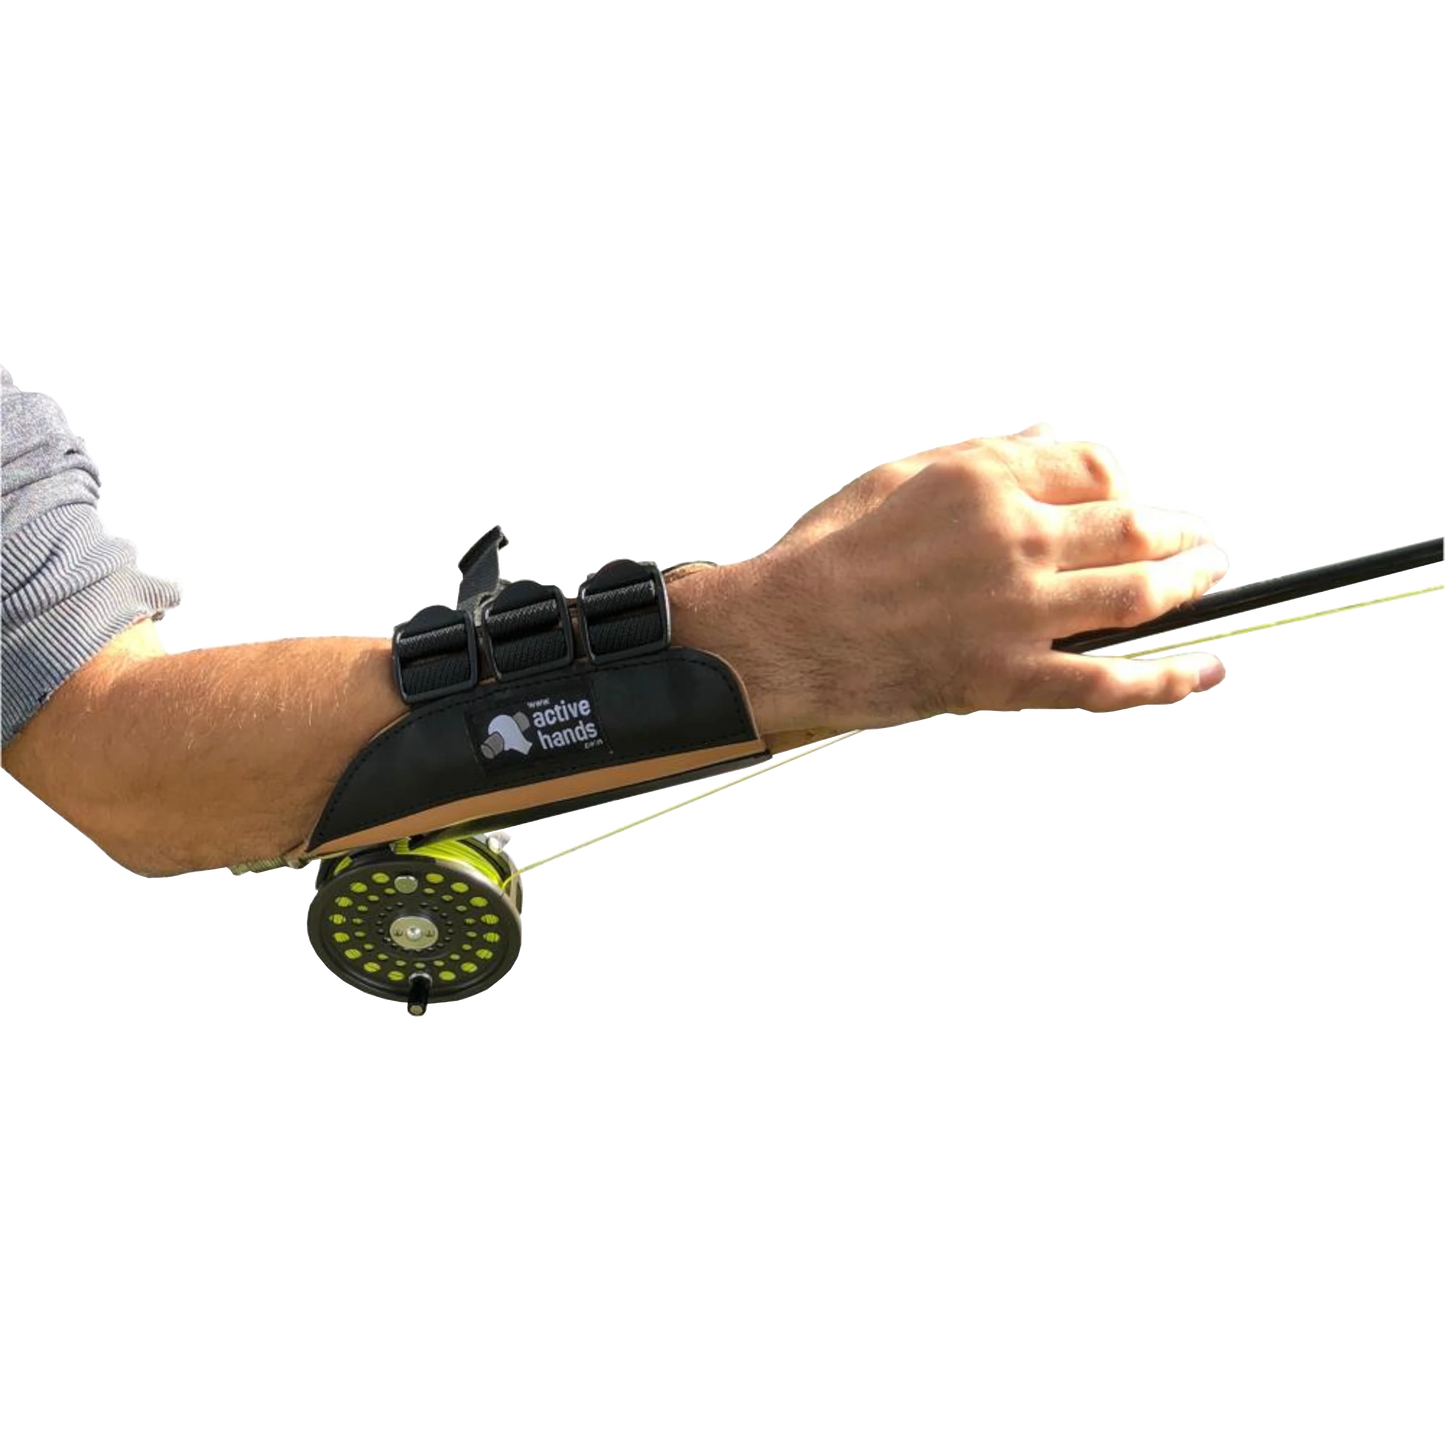 ACTIVE HANDS Strong Arm 2 Fishing Aid (linker Arm)